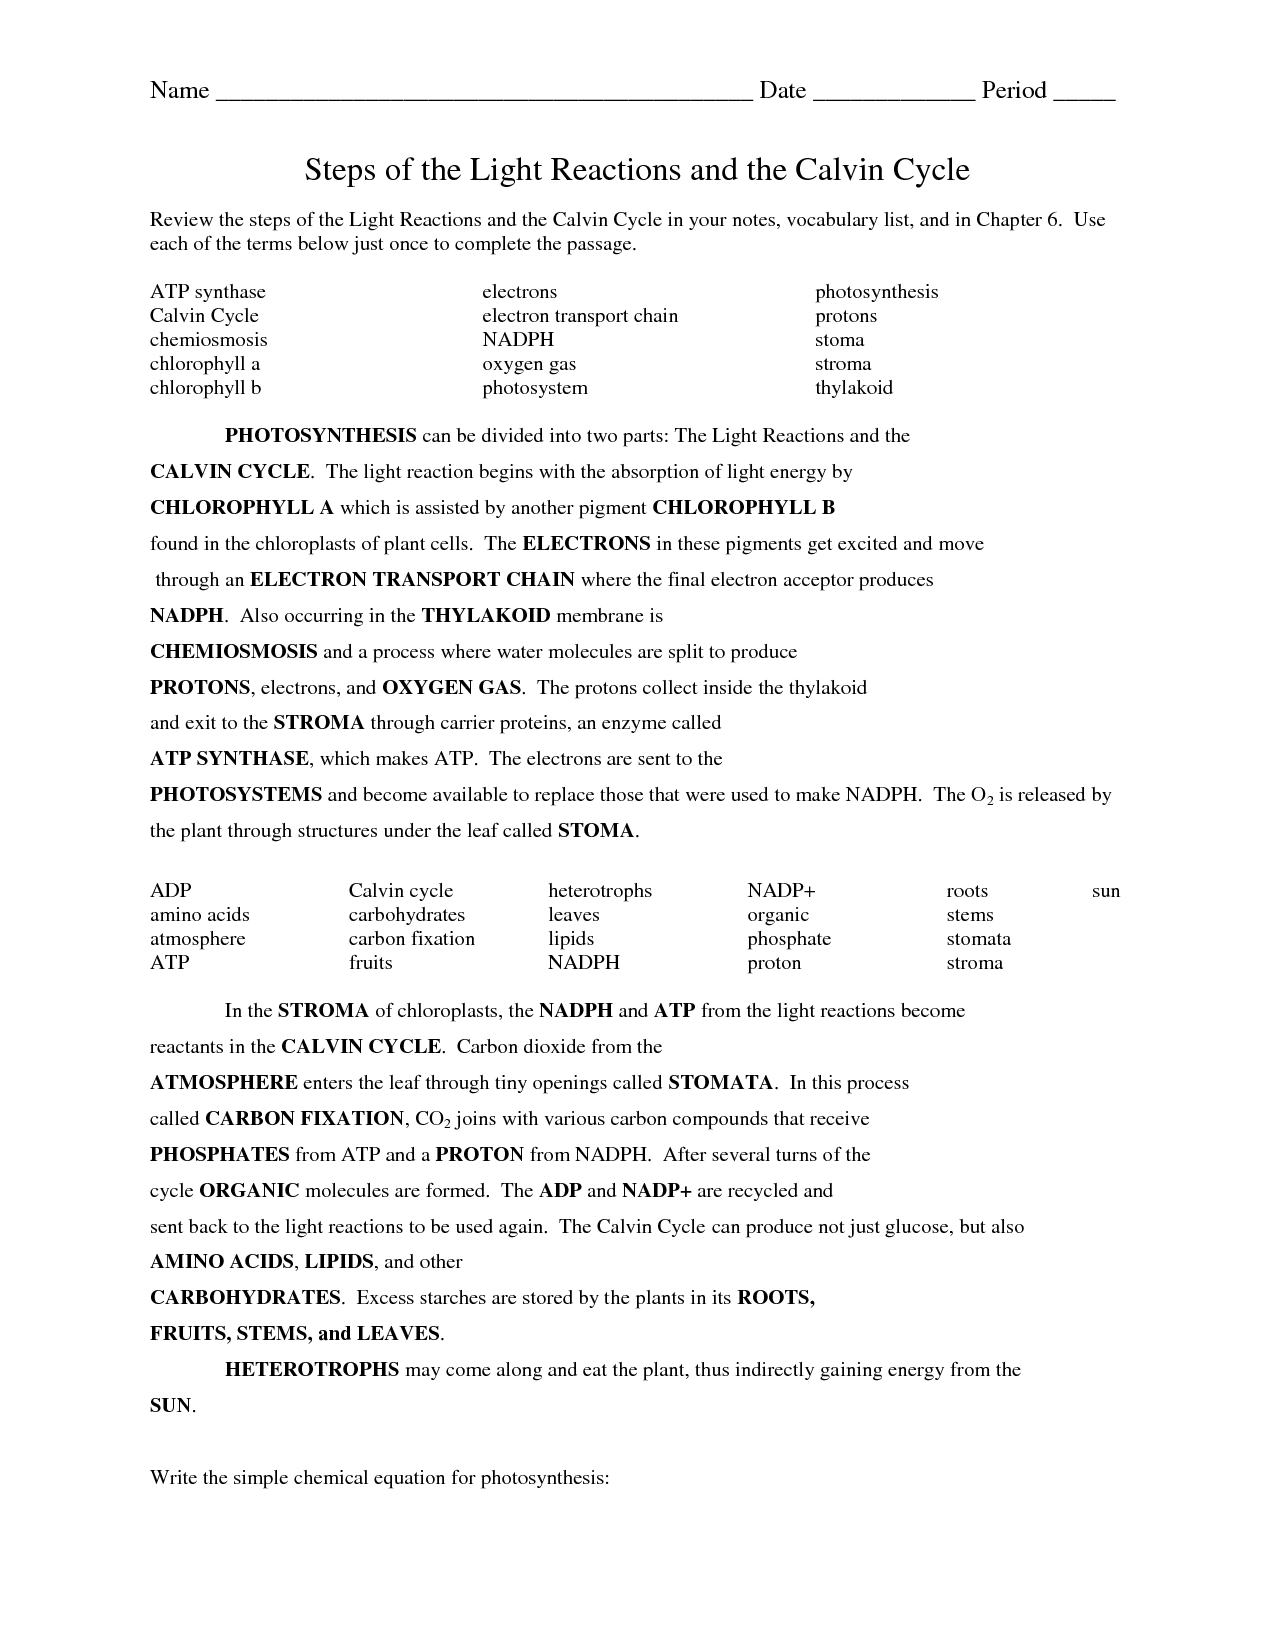 Rate Photosynthesis Worksheet Image